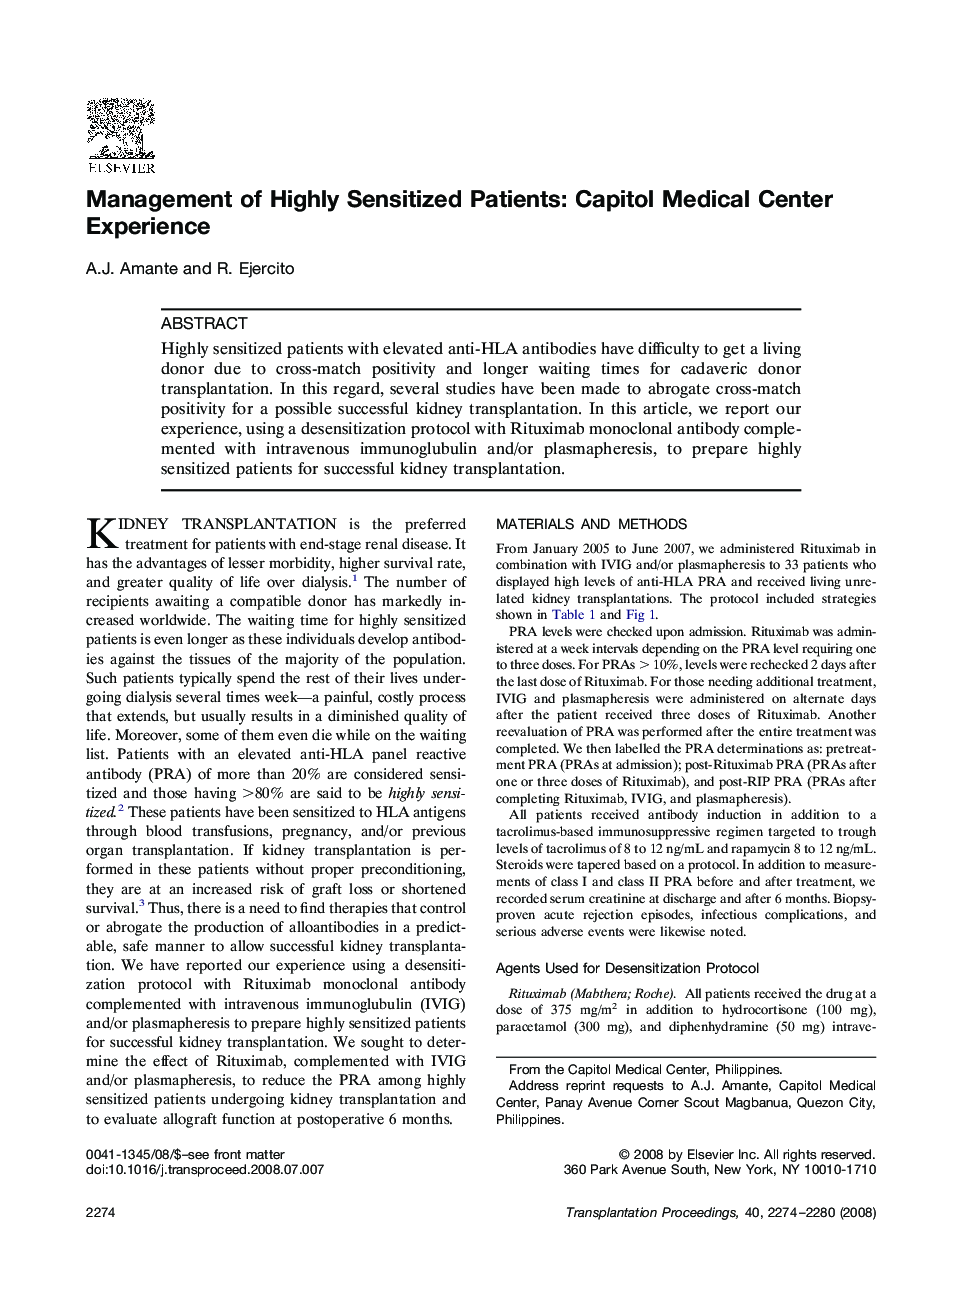 Management of Highly Sensitized Patients: Capitol Medical Center Experience